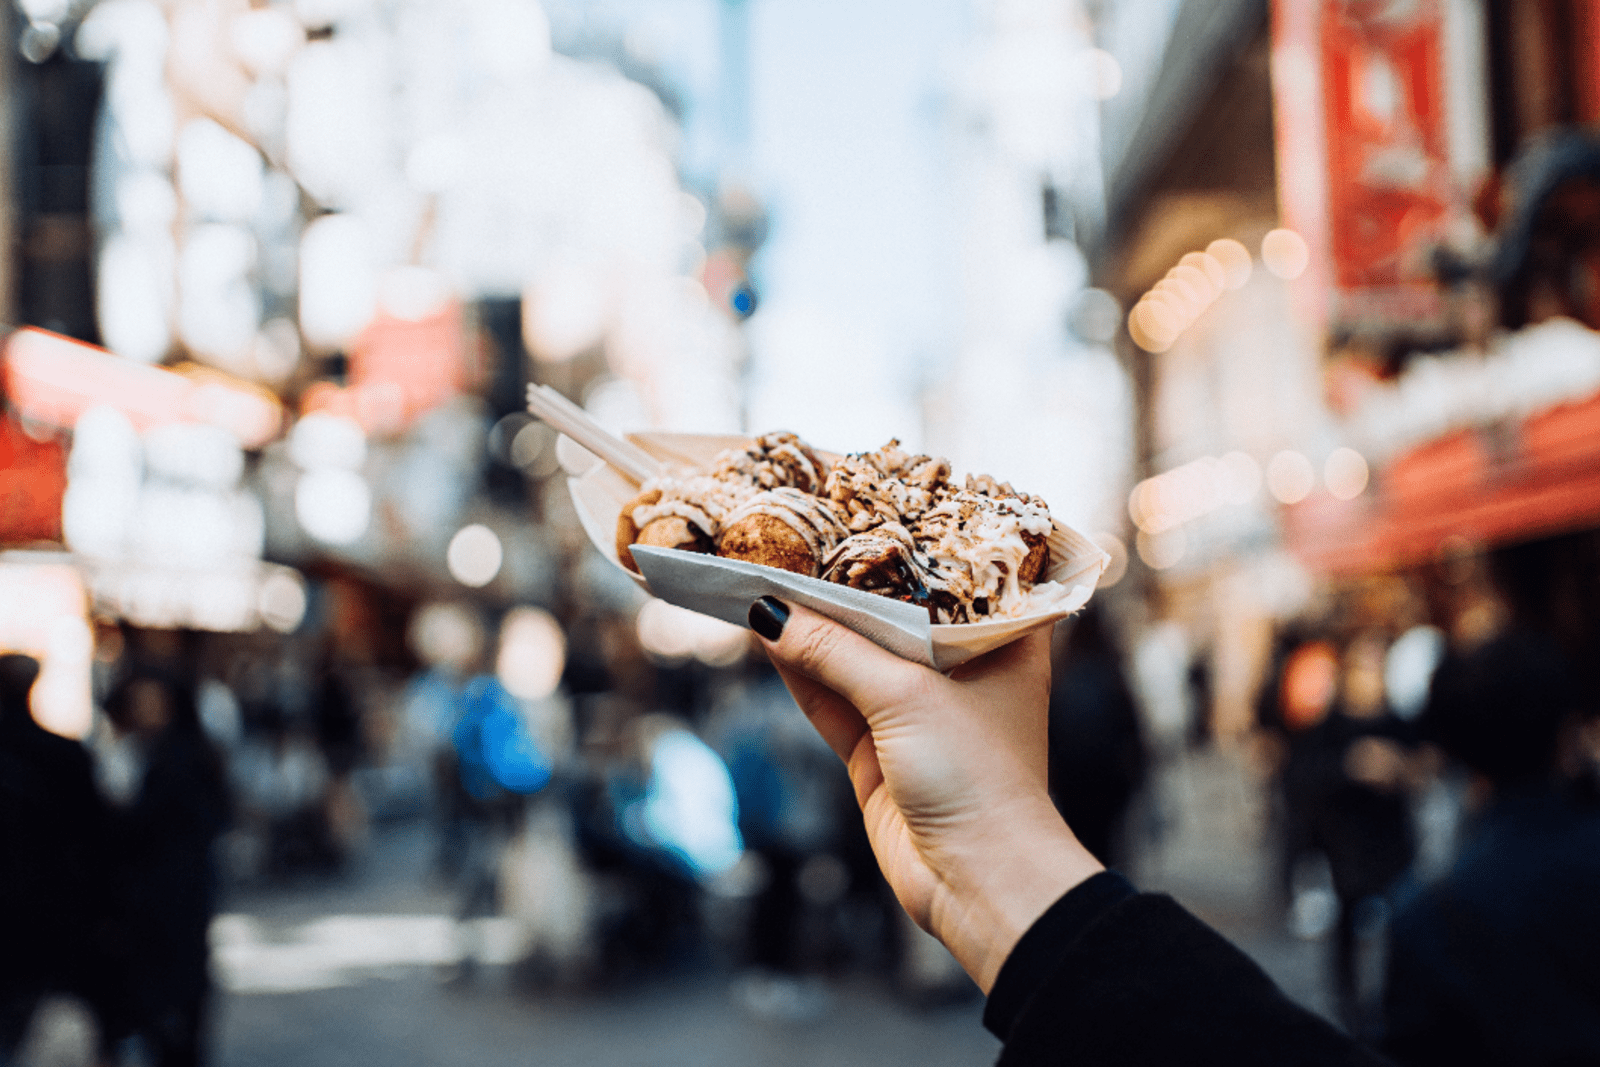 A traveller holds a tray of takoyaki in Japan